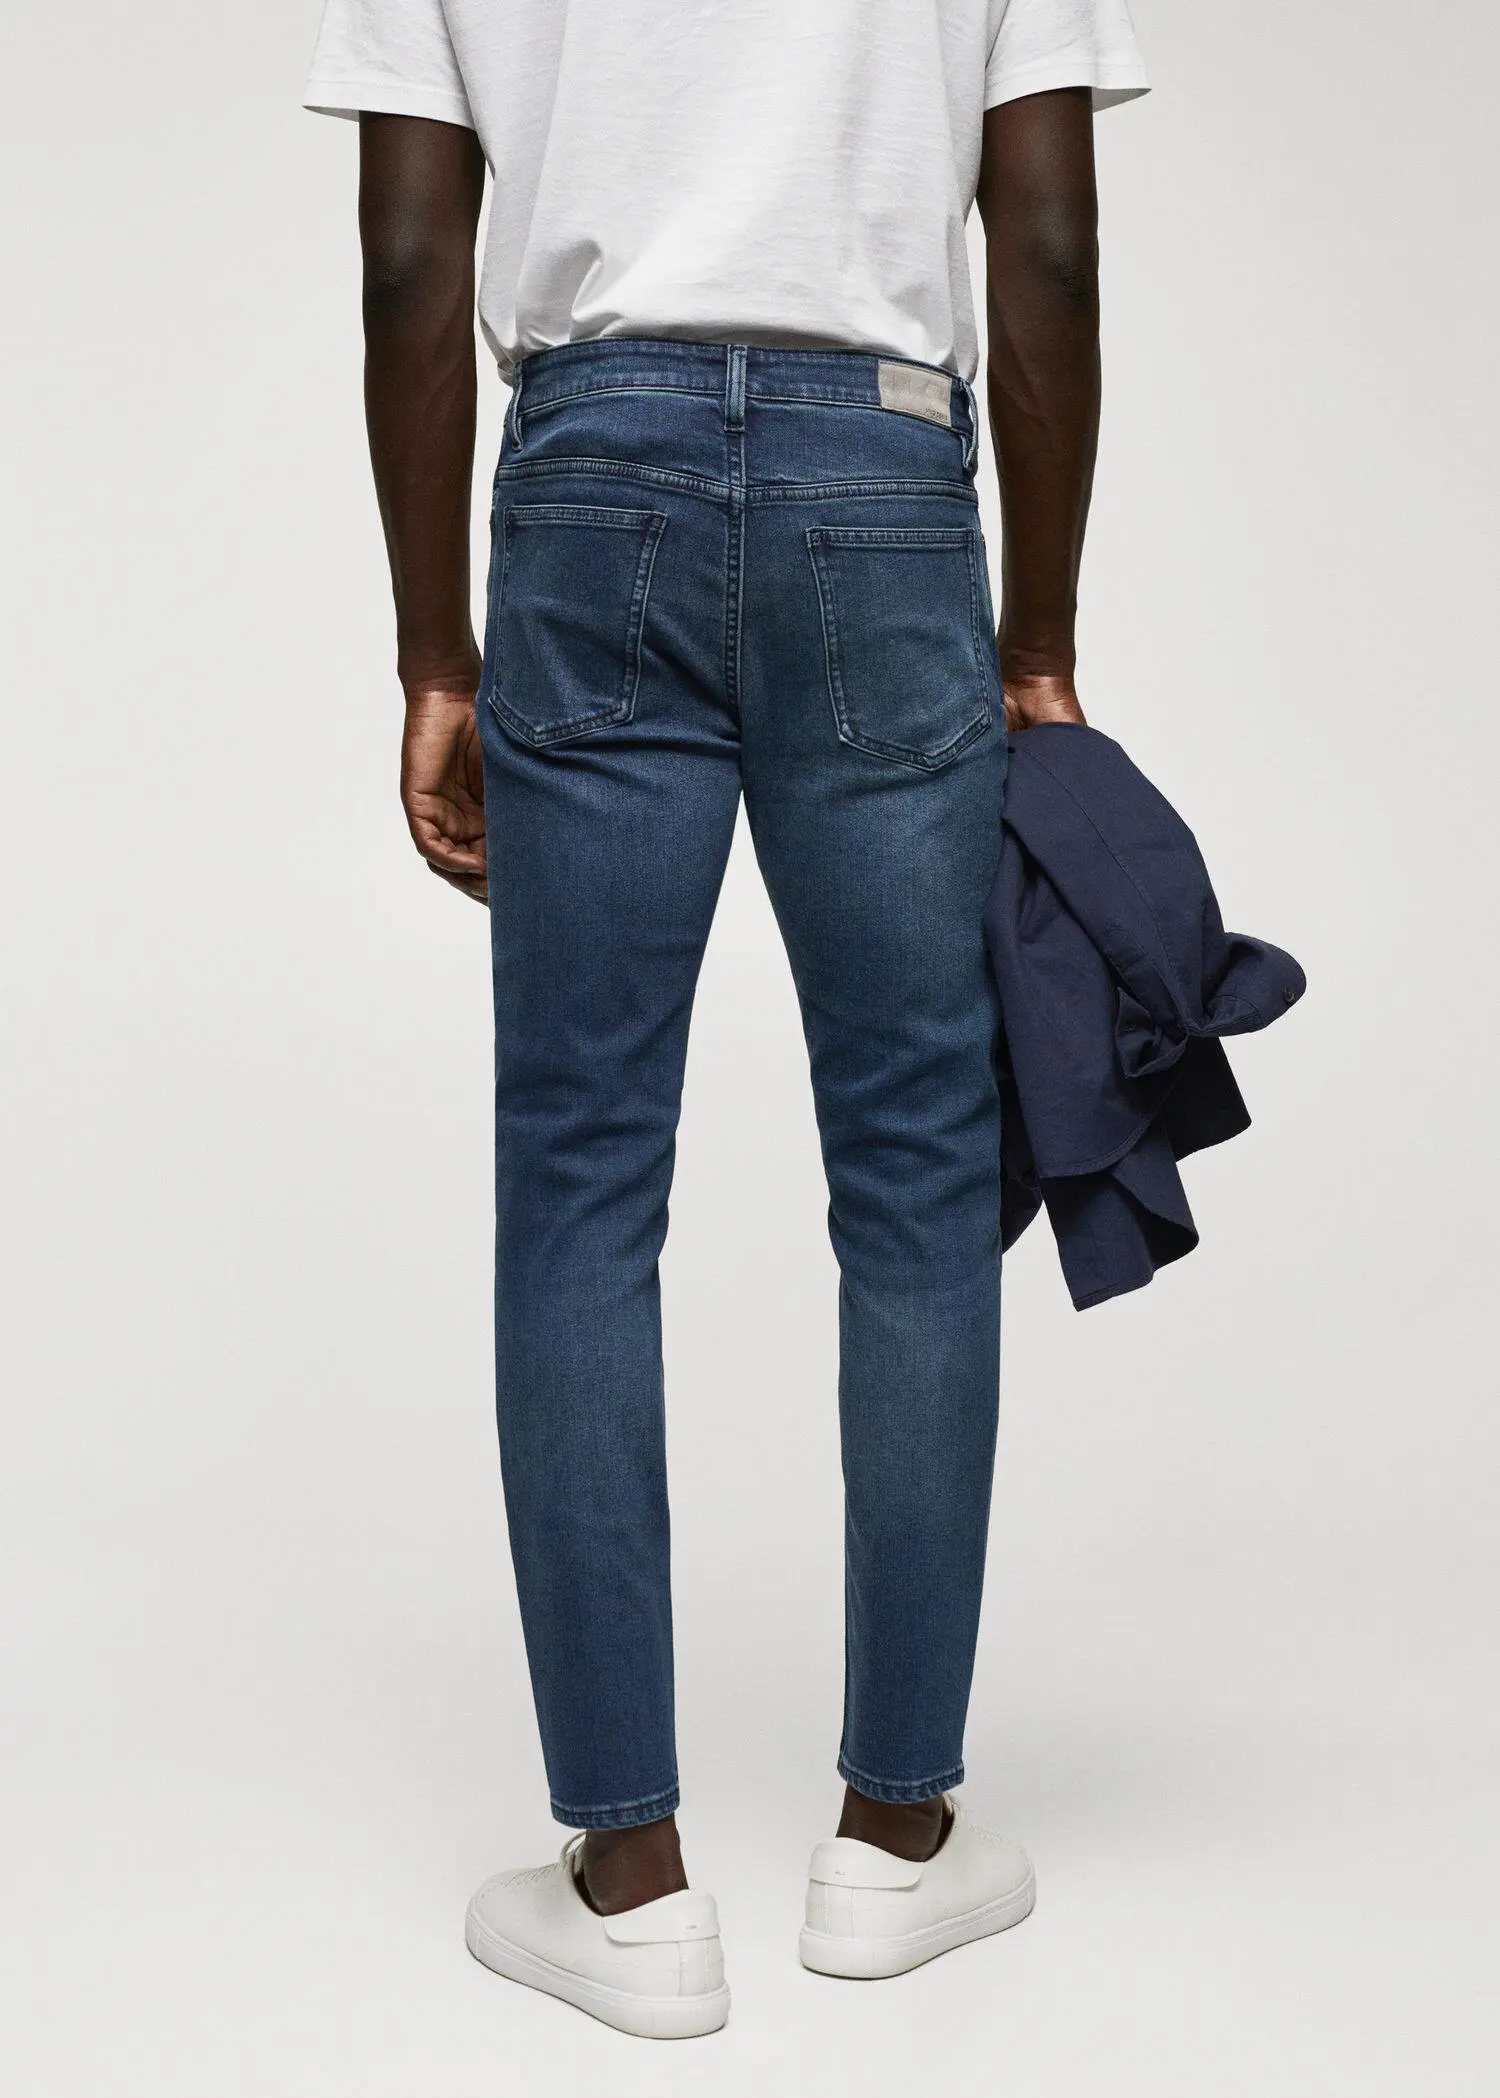 Mango Tom tapered cropped jeans. 3